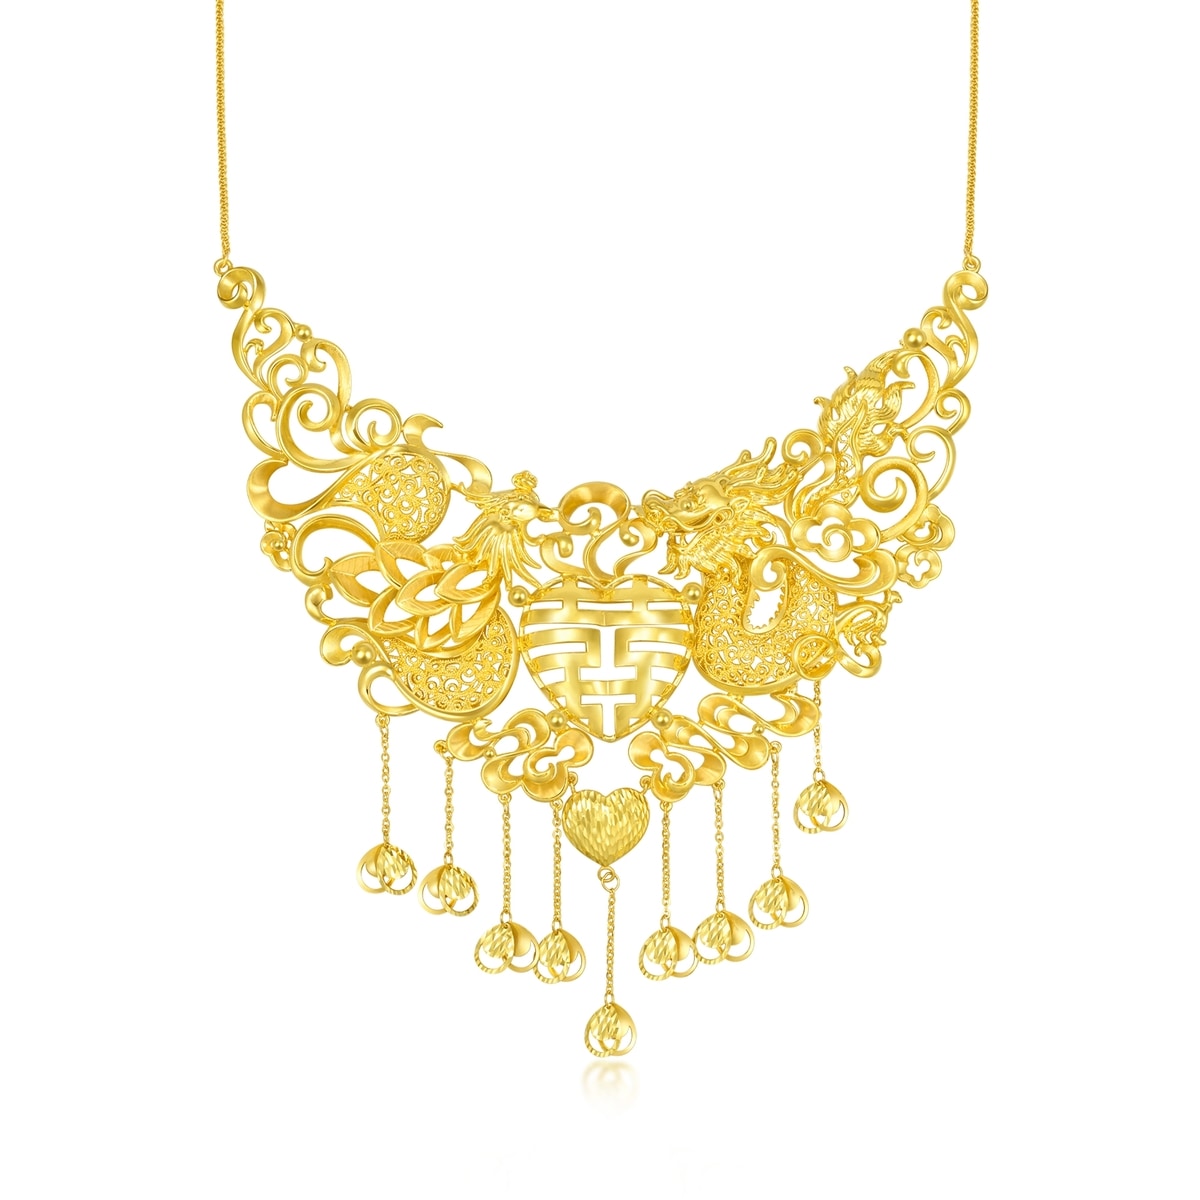 Chinese Wedding Collection 999 Gold Necklace - 94297N | Chow Sang Sang ...